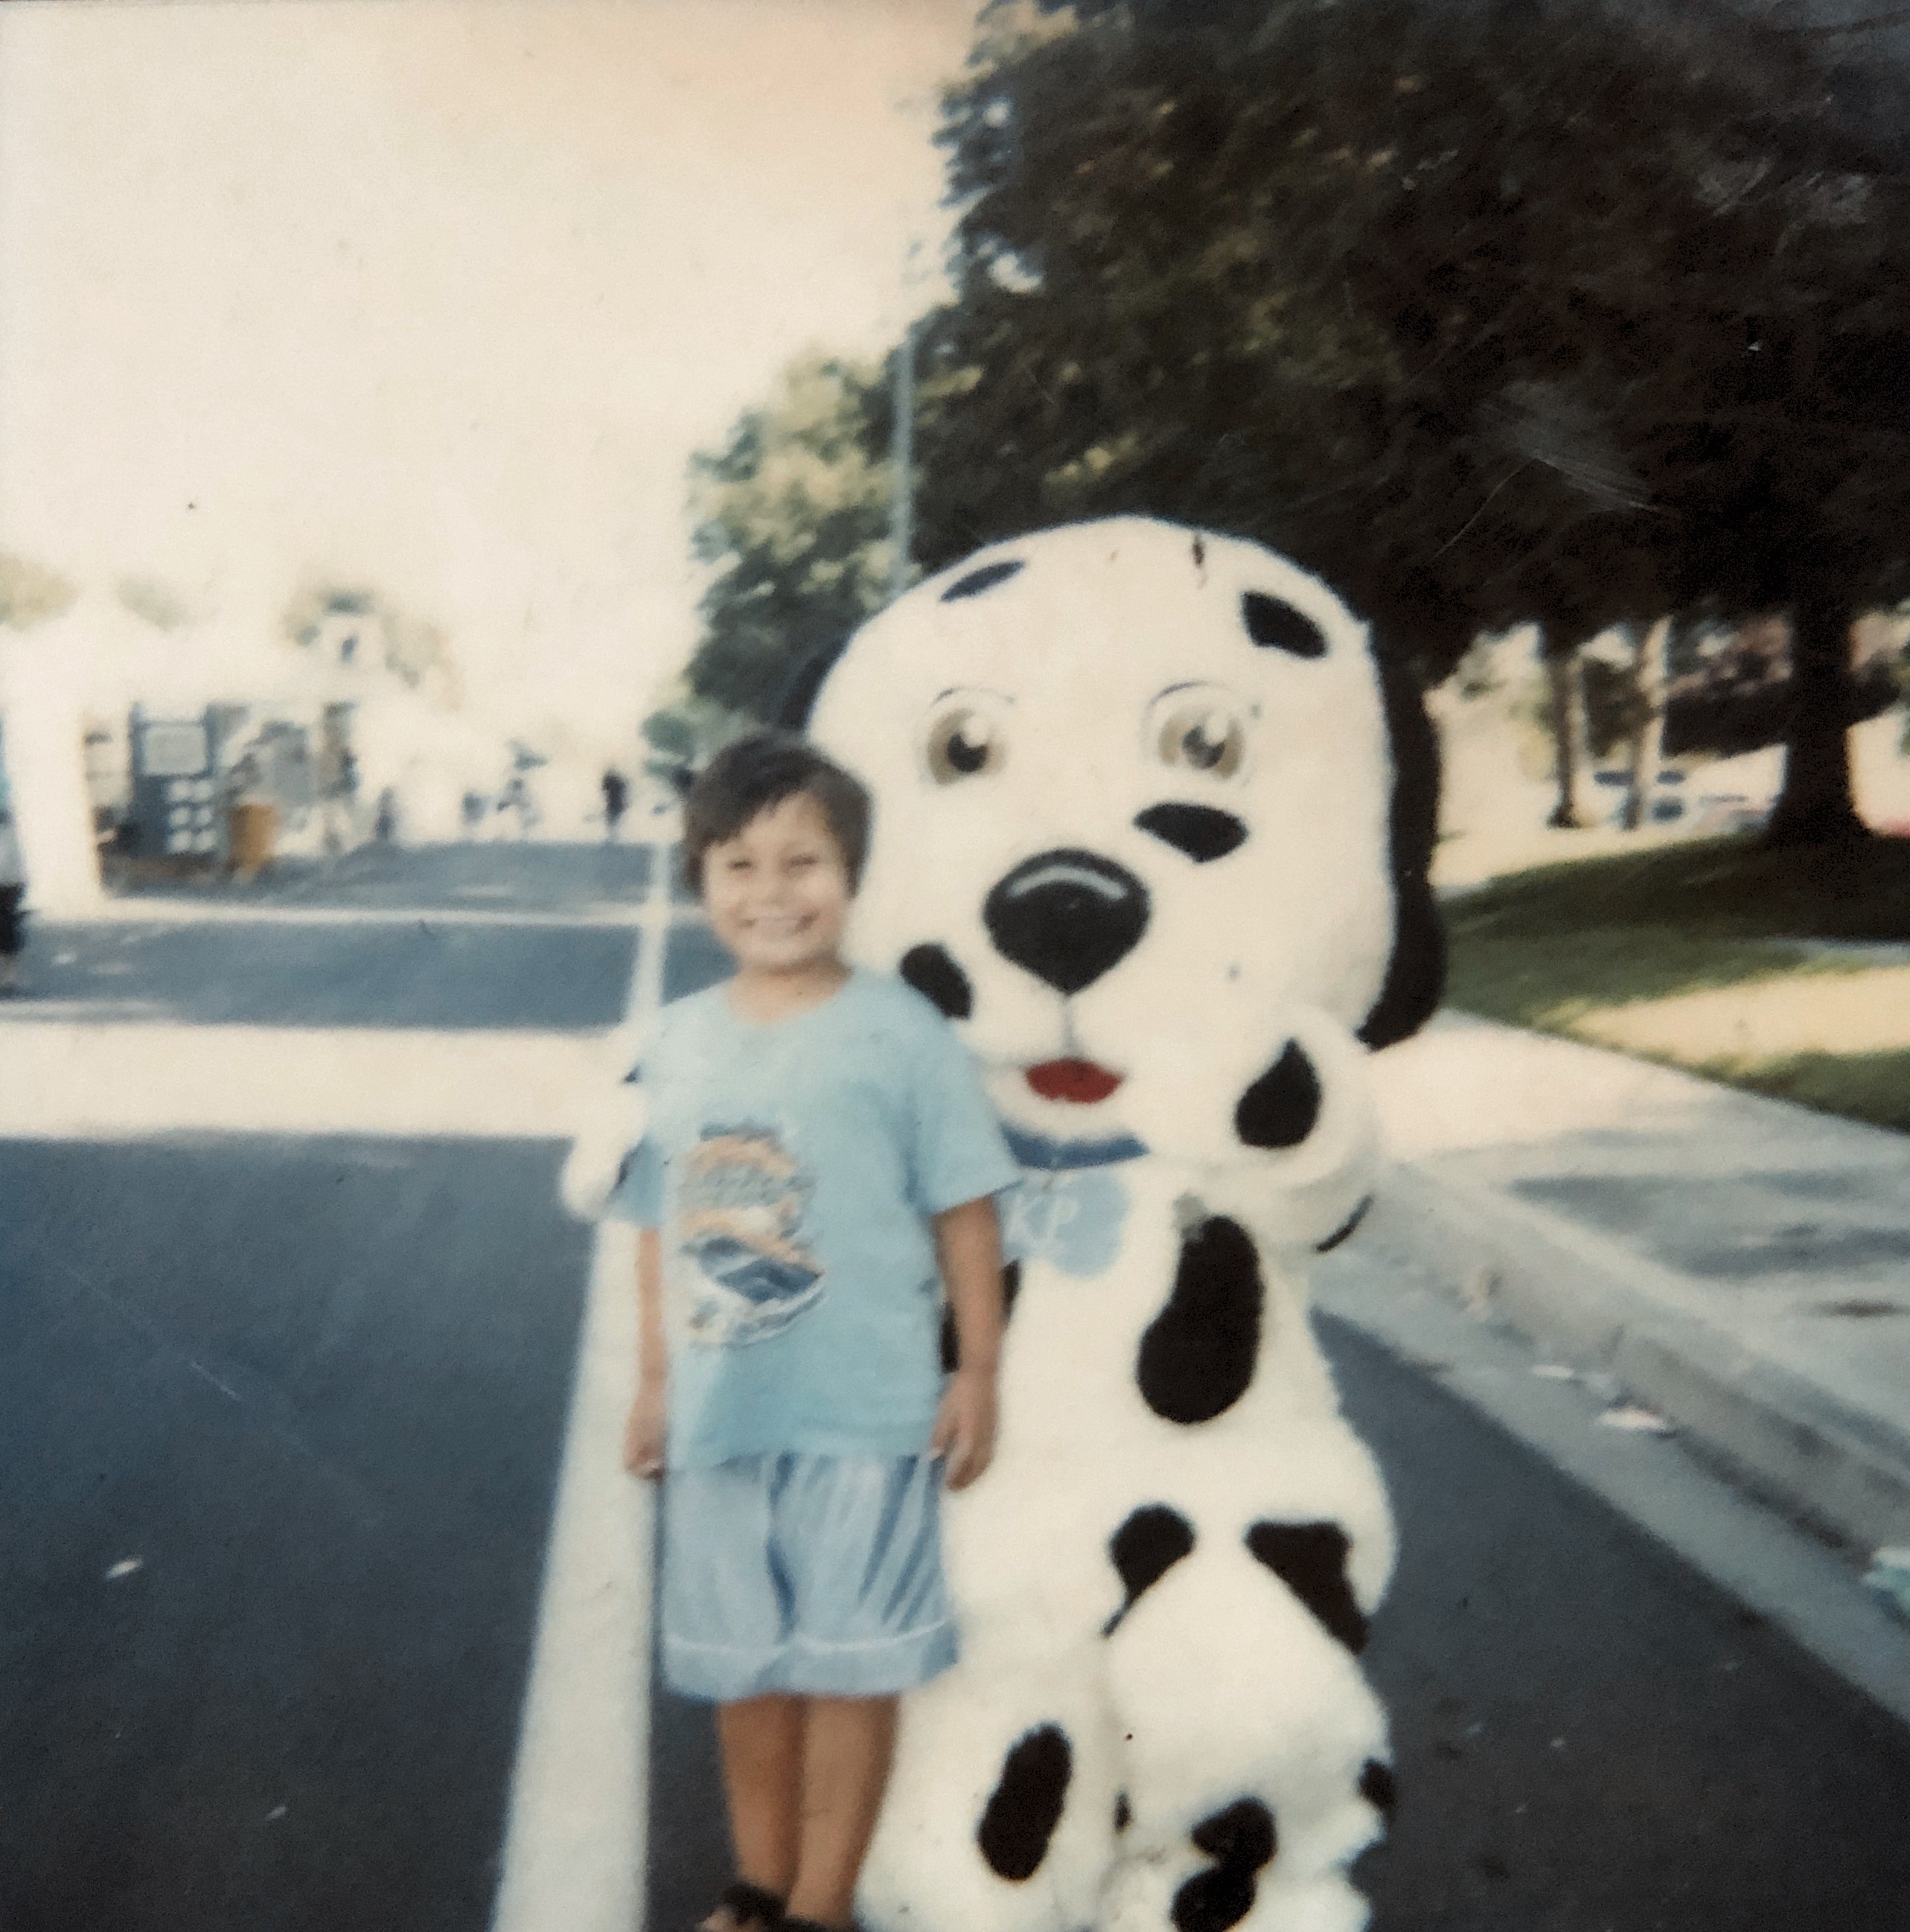 This is a very old photo of my grandpa from 1948 he was taking a picture with some type of mascot but I’m not quite sure who it is.